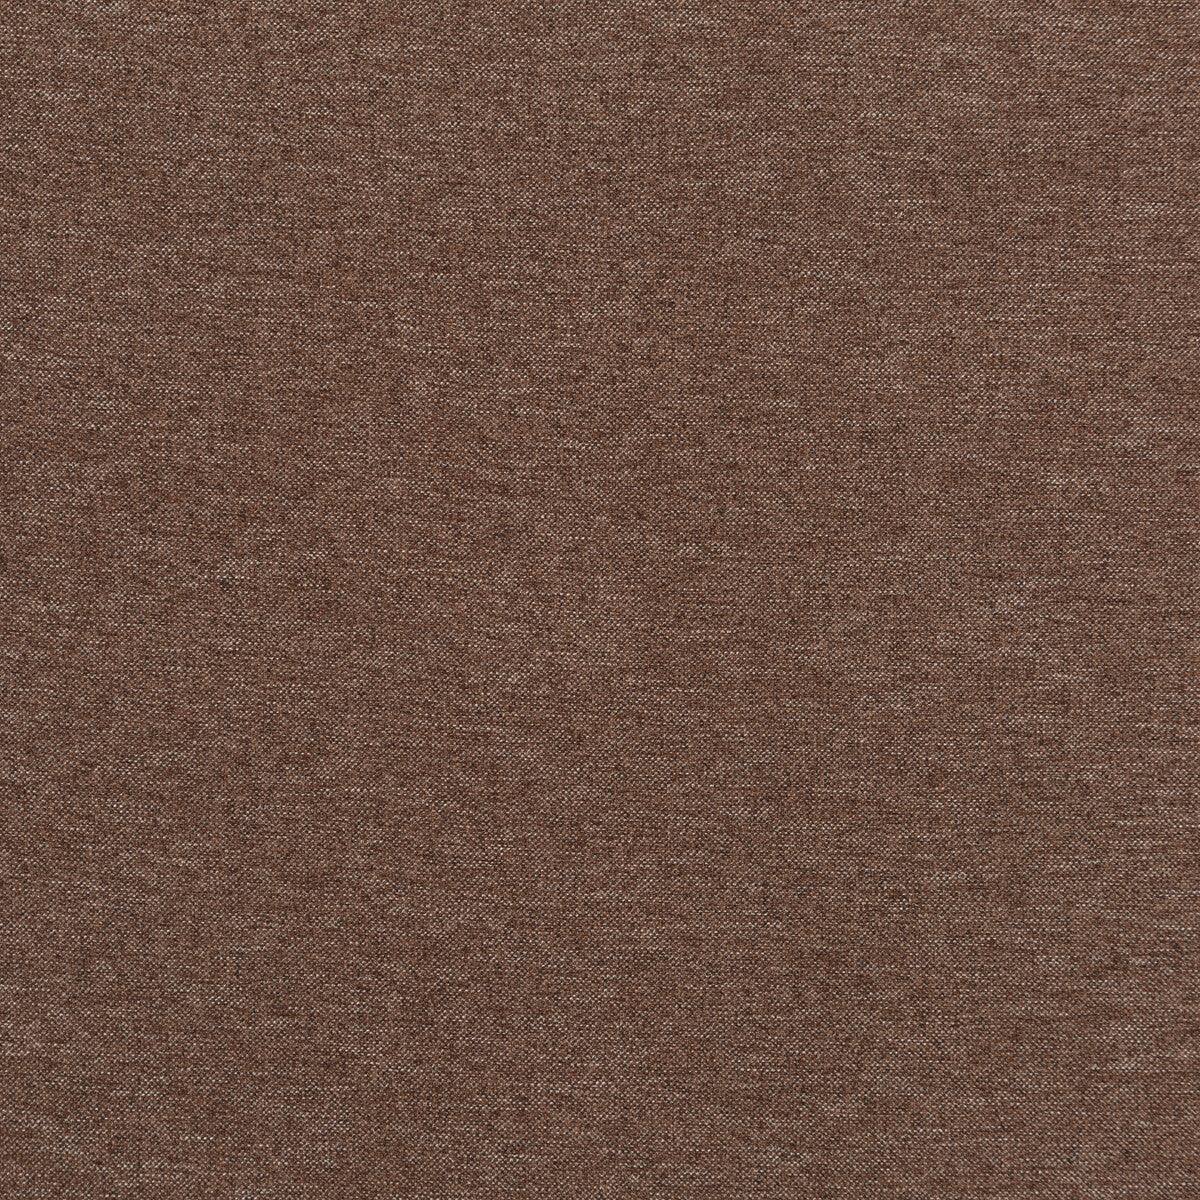 Melbury fabric in chocolate color - pattern PF50440.290.0 - by Baker Lifestyle in the Carnival collection